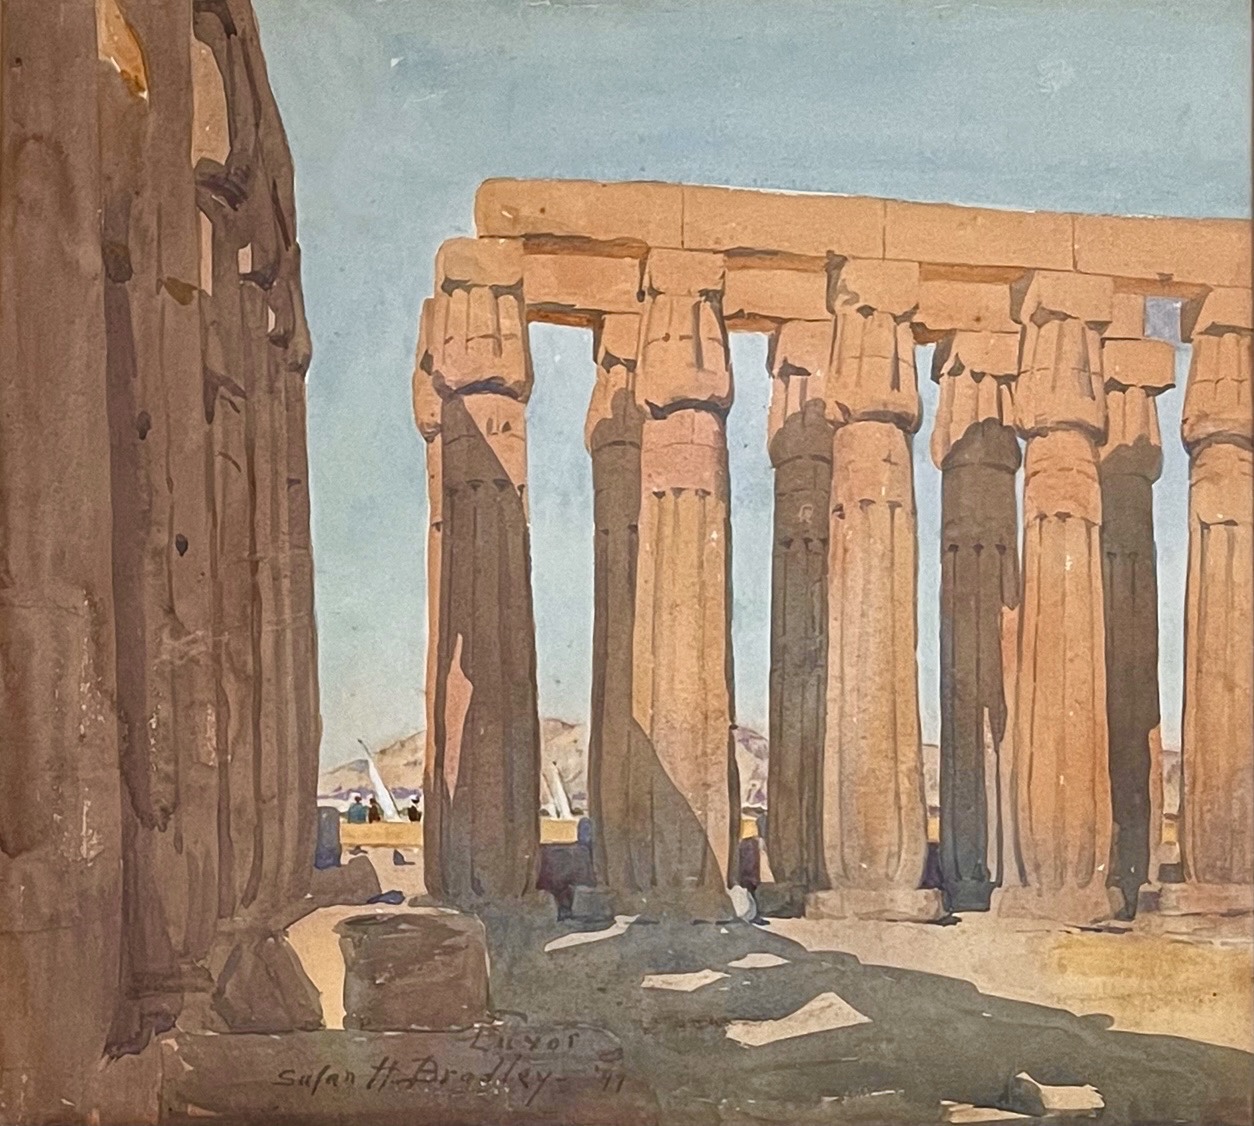 A watercolor painting features a scene of ancient Egyptian columns painted in an earth-tone, half lit from the sun and half under shadows from the structures surrounding it. The sky is a clear blue.